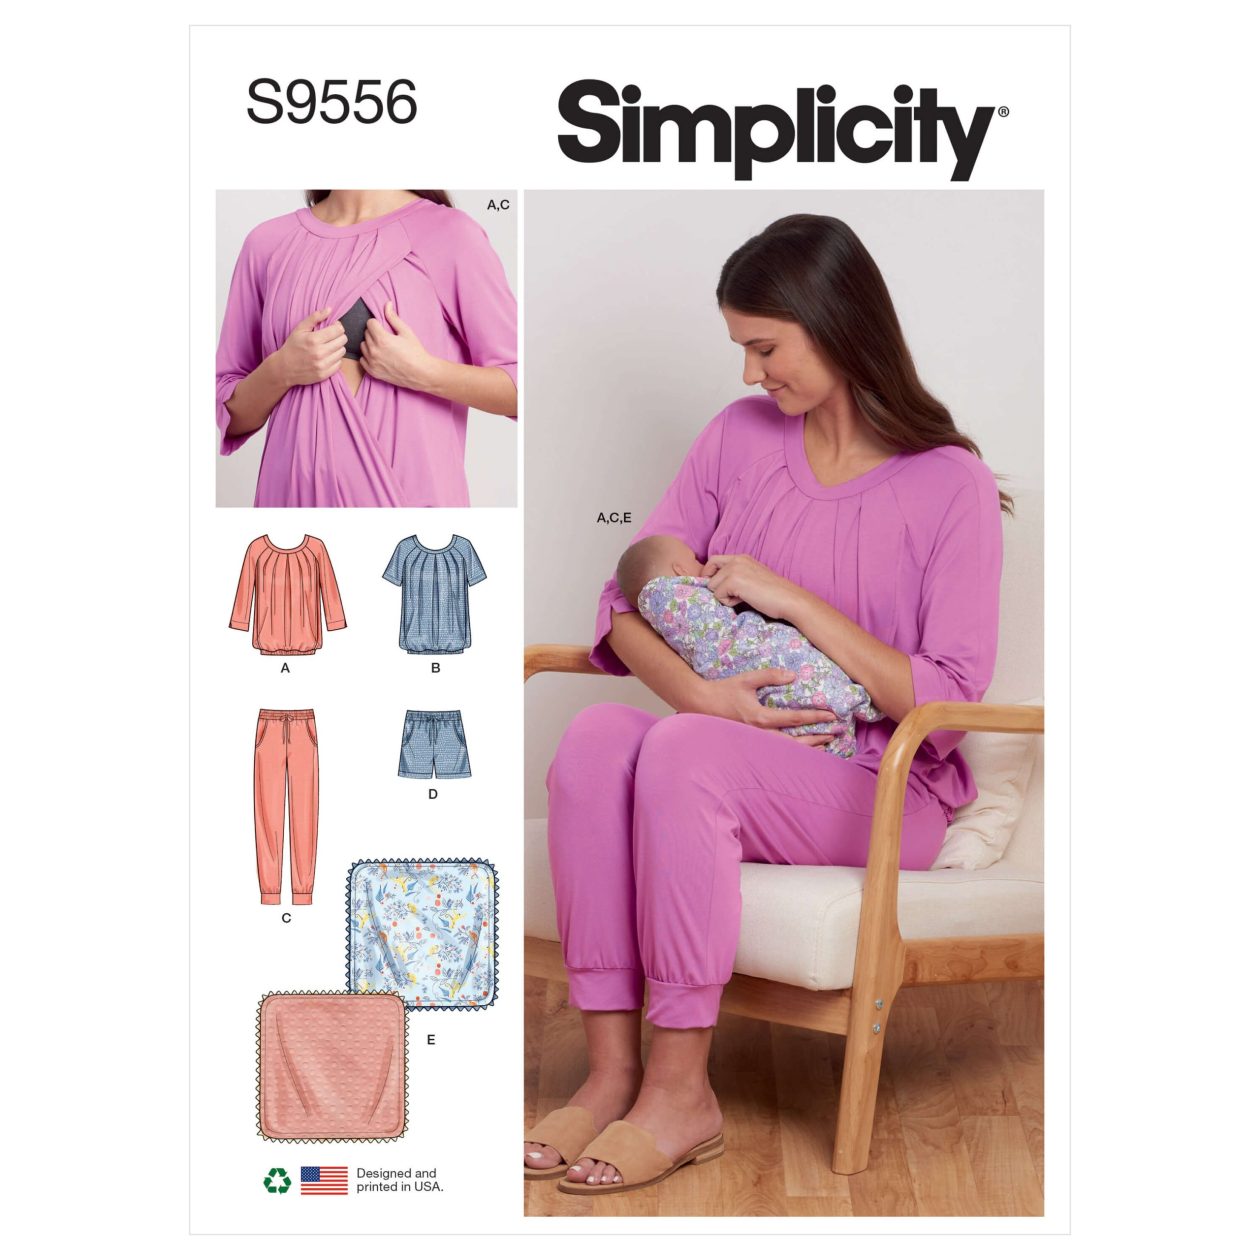 Simplicity Sewing Pattern S9556 Misses' Nursing Tops, Trousers, Shorts and Blanket